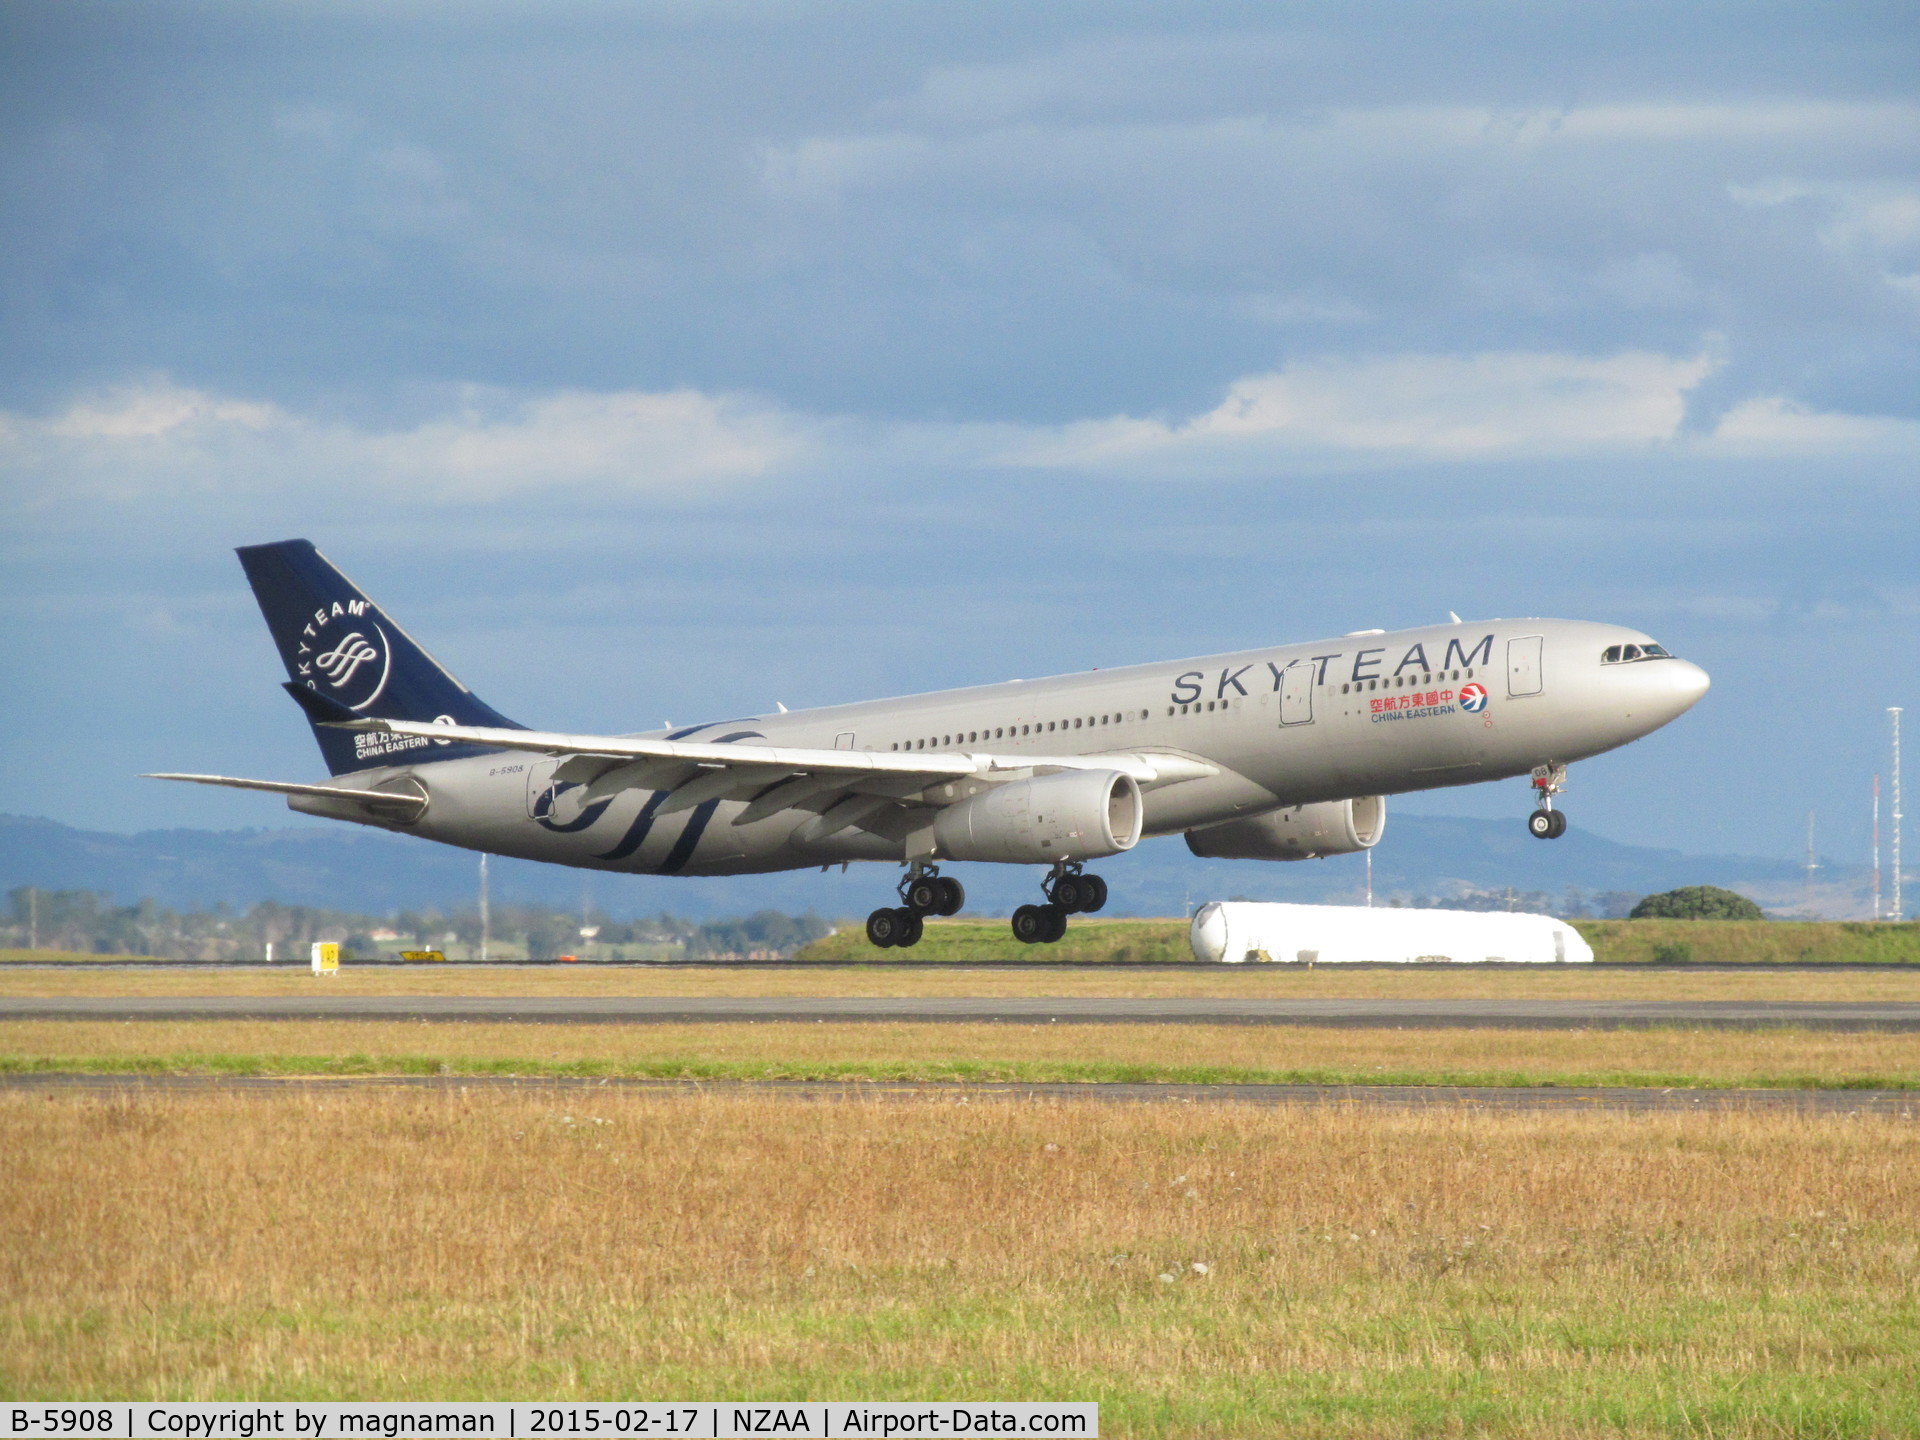 B-5908, 2012 Airbus A330-243 C/N 1372, touchdown at AKL - daily afternoon flight from china.